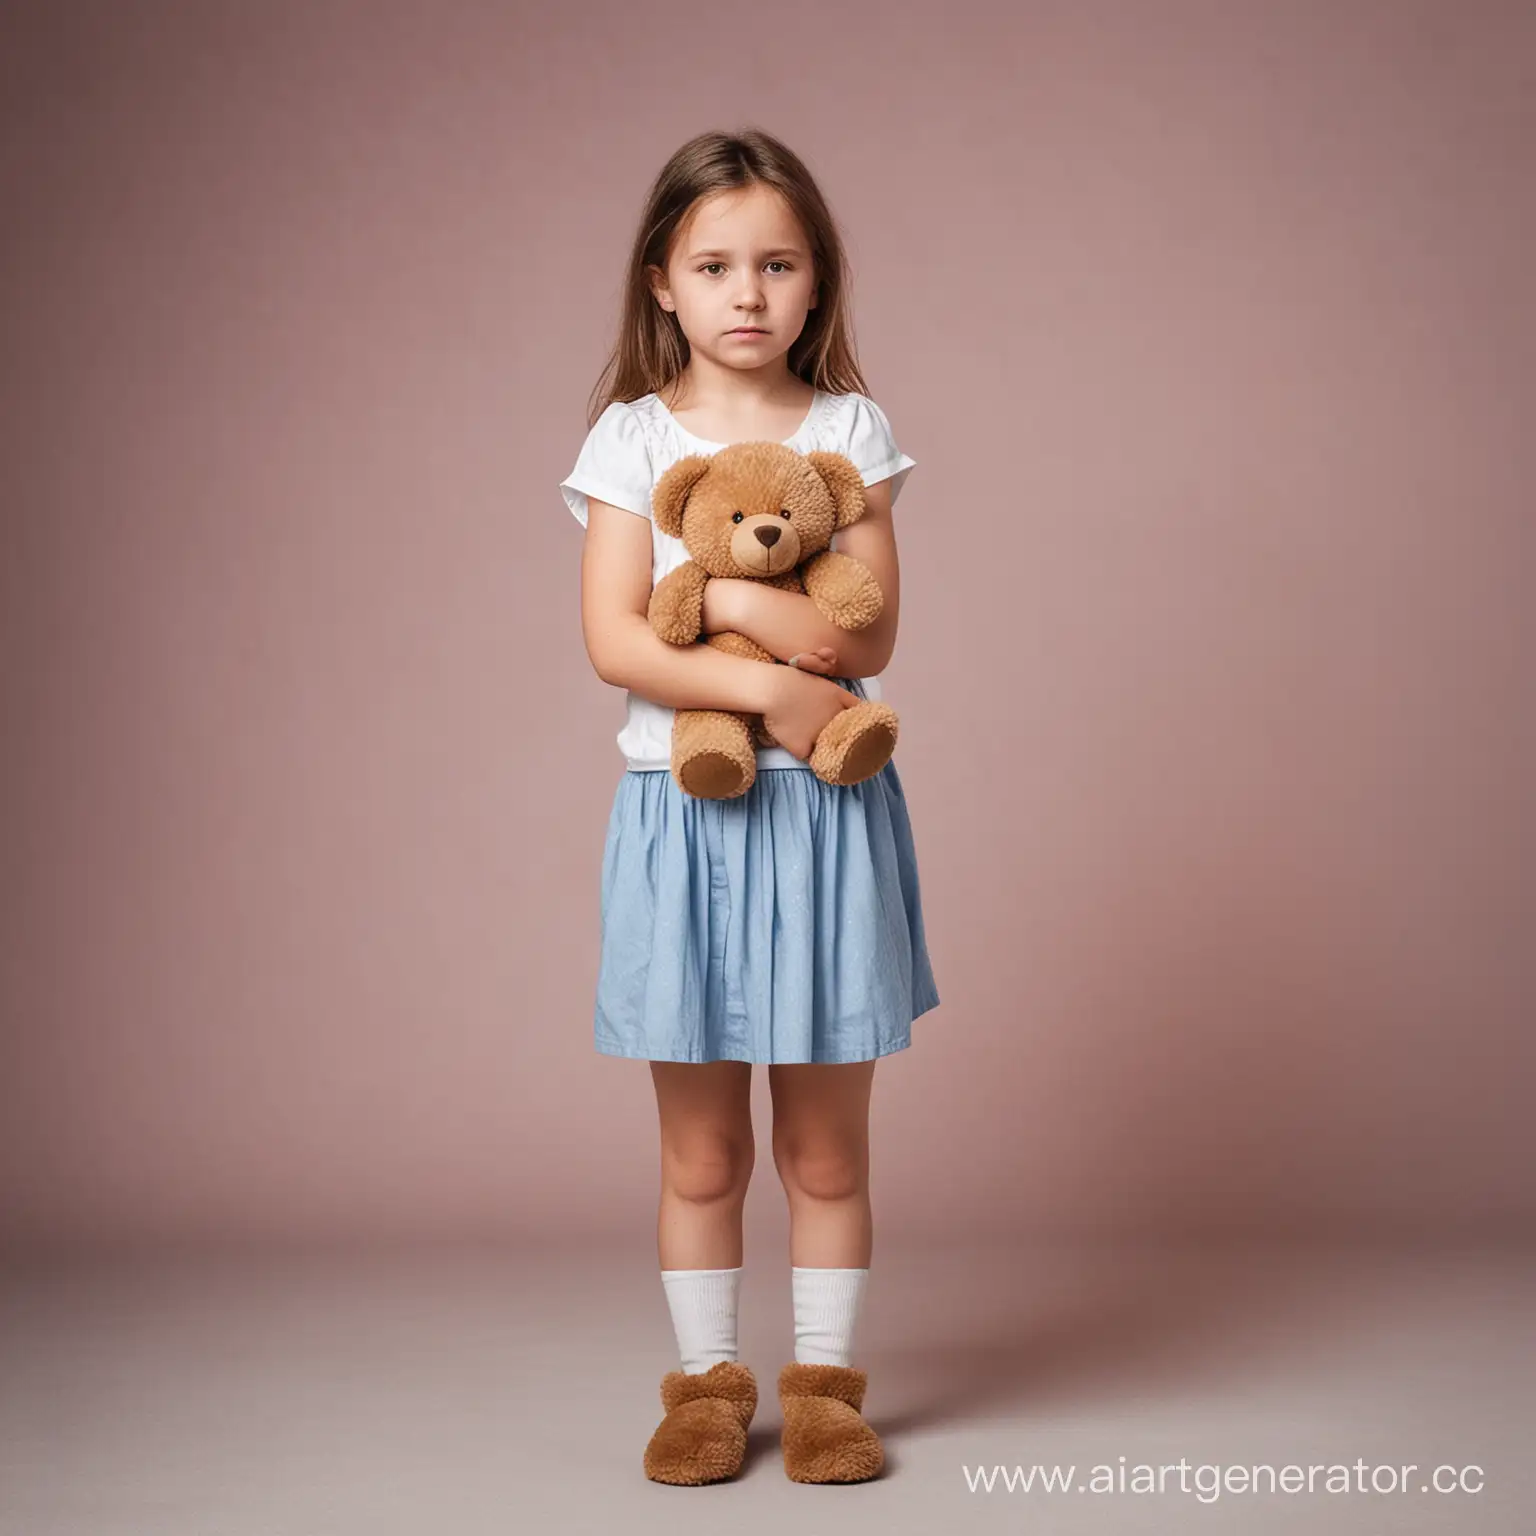 Lonely-10YearOld-Girl-Standing-with-Teddy-Bear-Toy